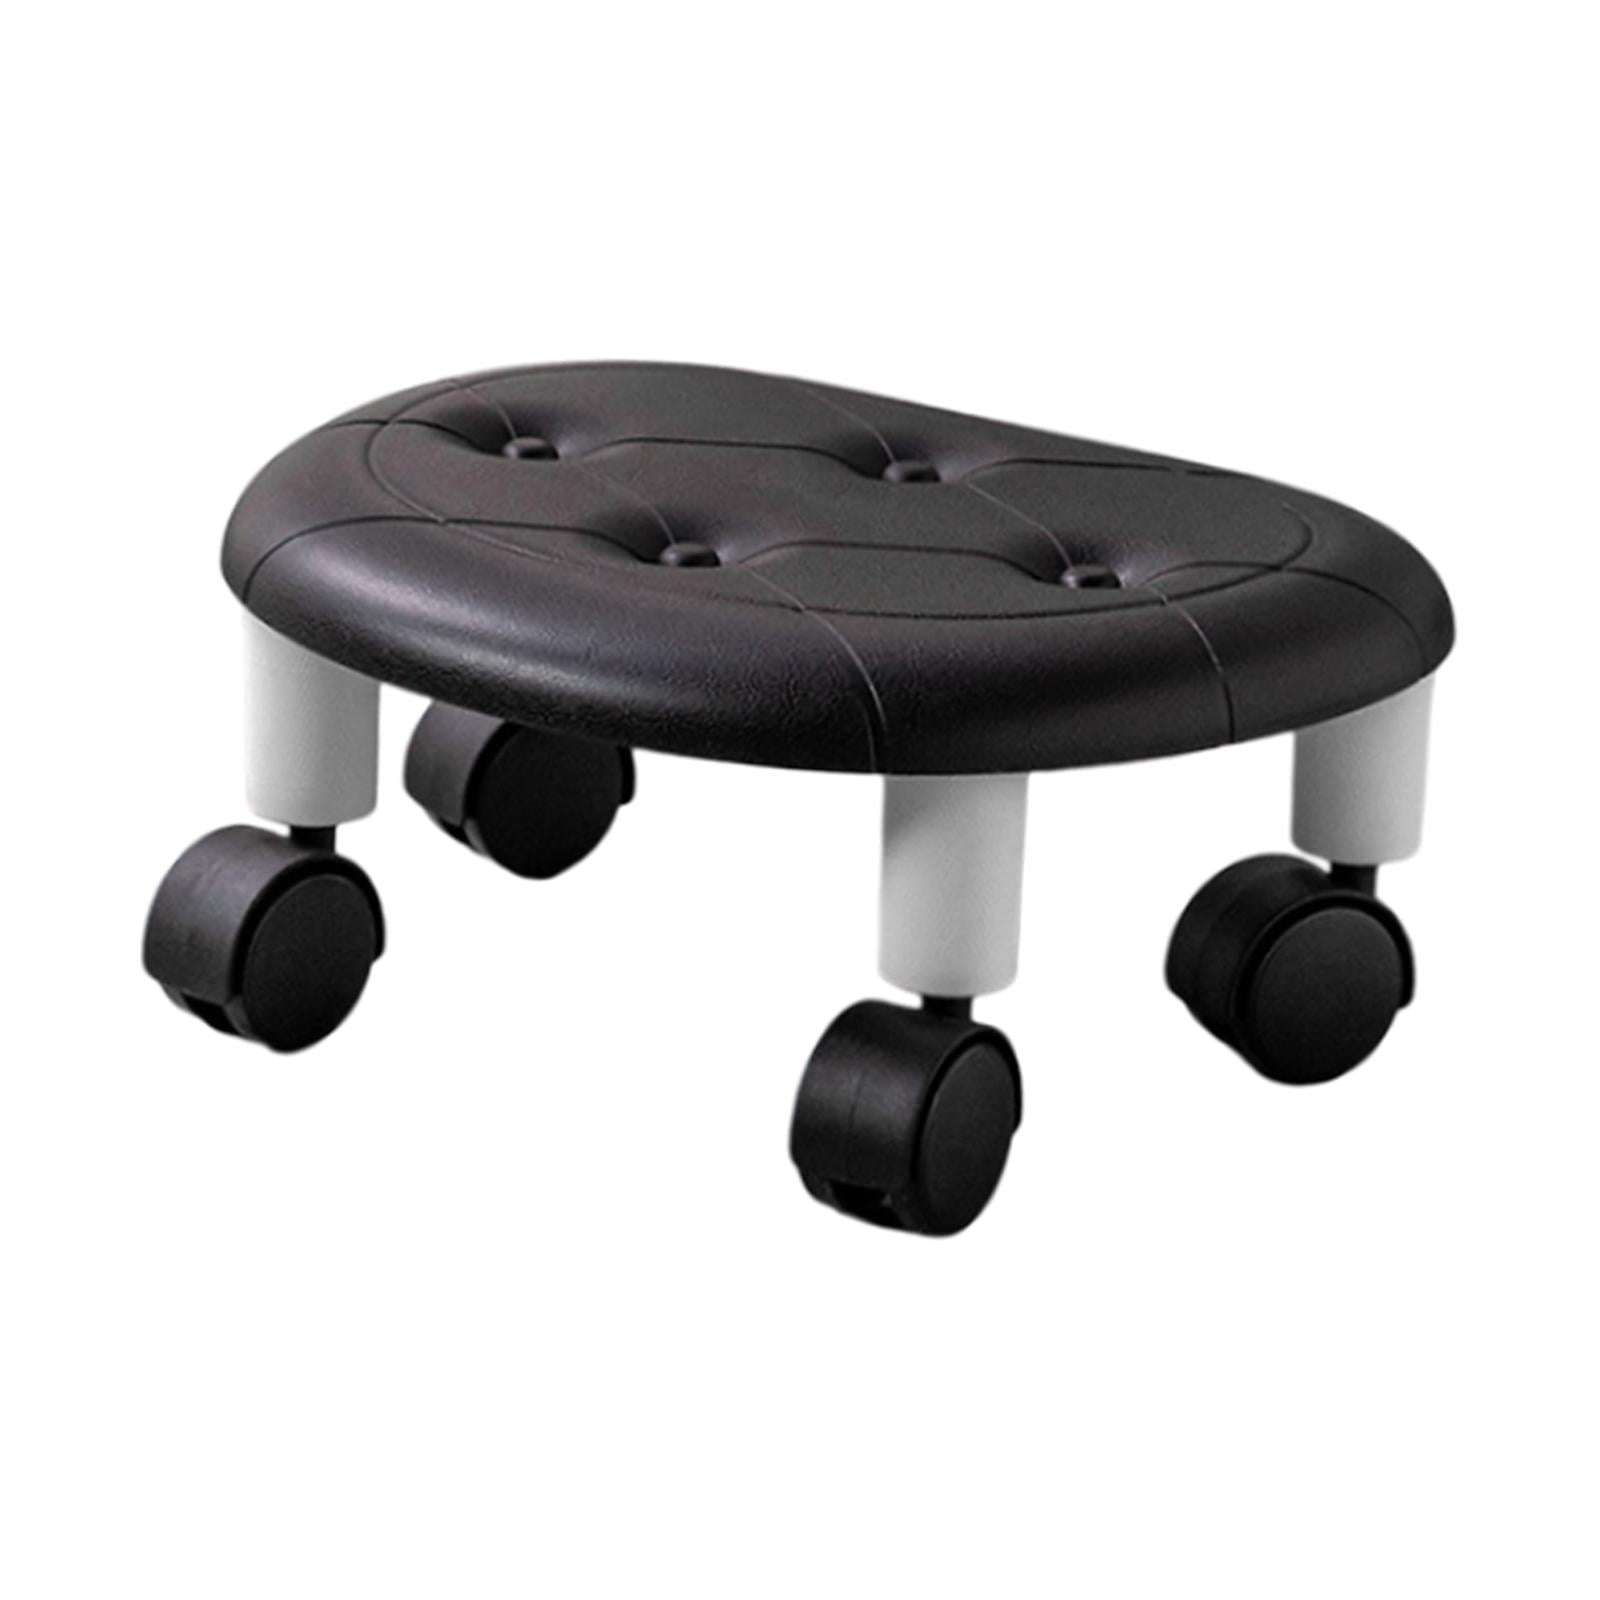 Low Roller Seat Stool Footrest Comfortable 360 Degree Rotating